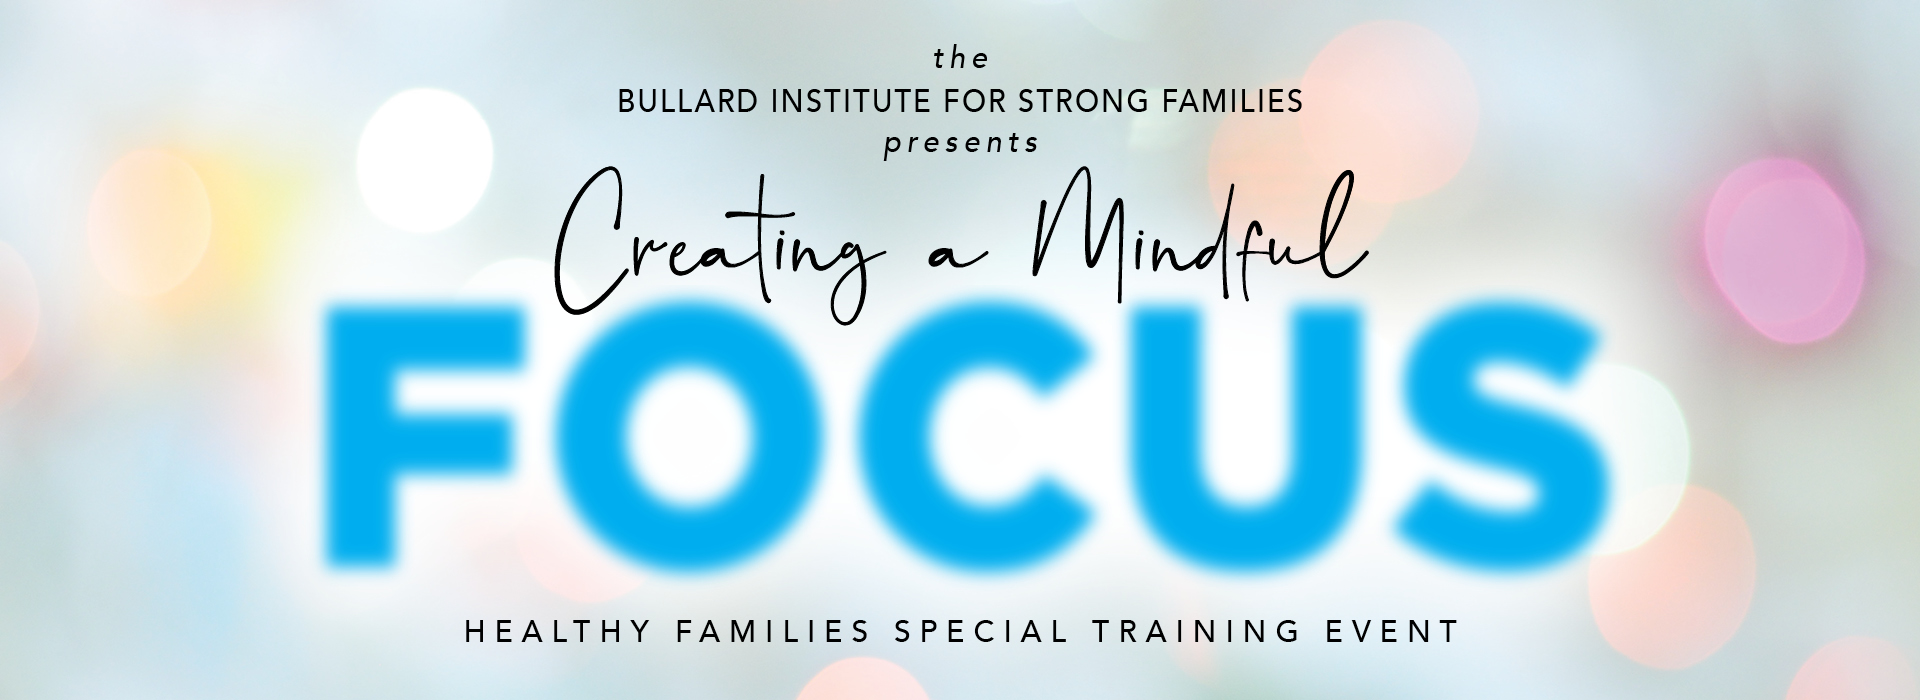 The Bullard Institute for Strong Families presents Creating a Mindful Focus. A Healthy Families Special Training Event.